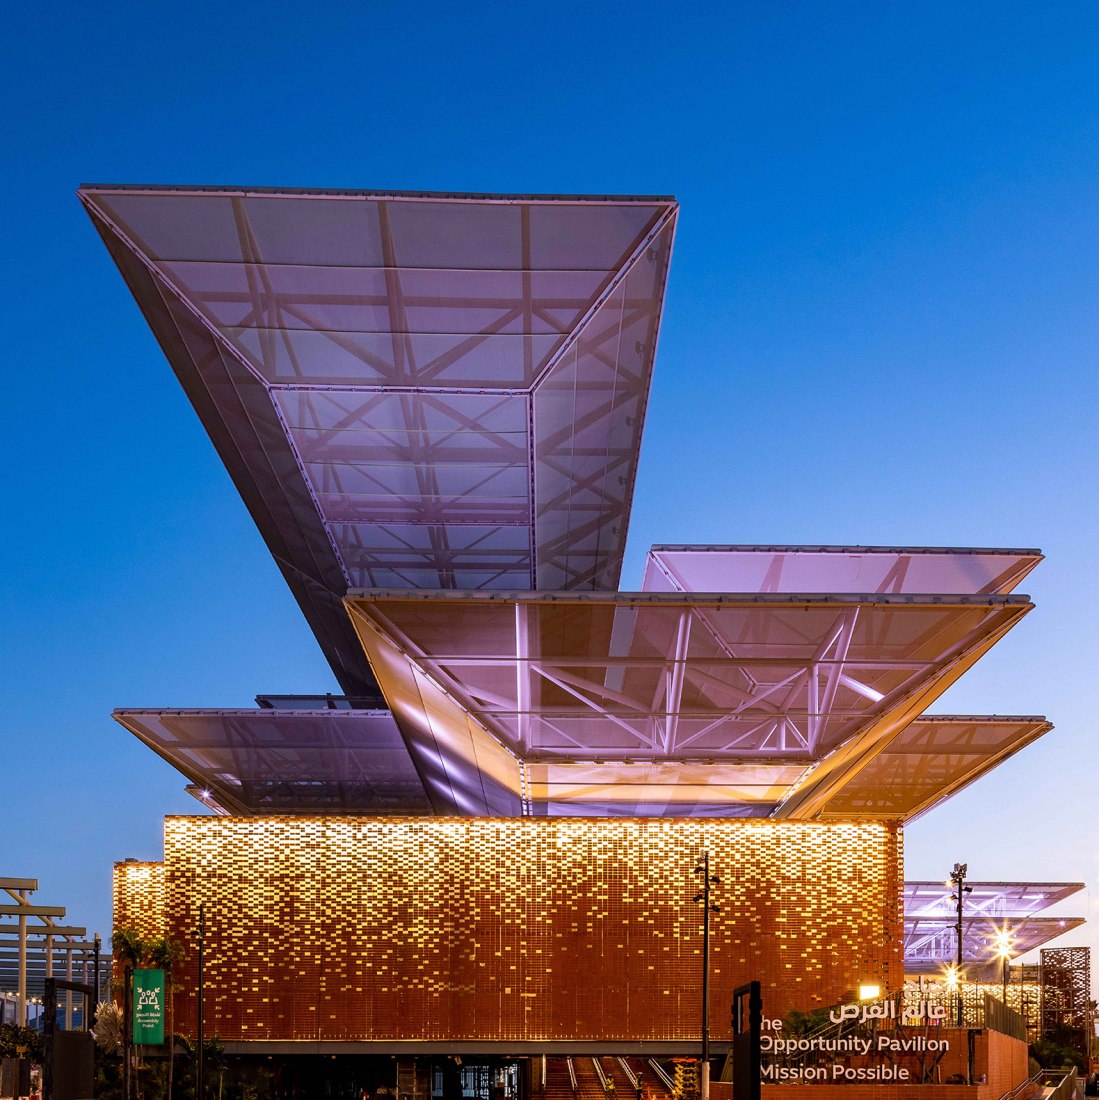 Mission Possible - The Opportunity Pavilion by AGi architects. Photograph by Expo 2020 Dubai.